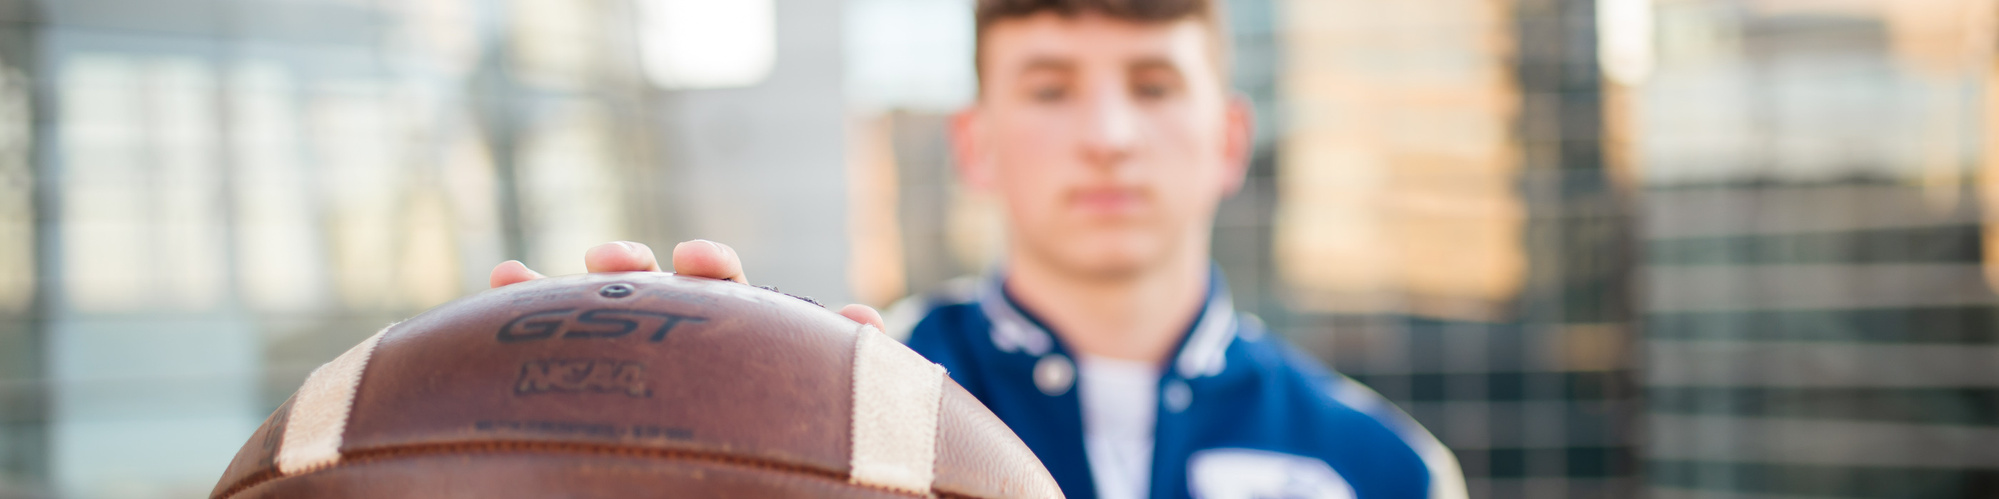 senior boy wearing a letterman jacket is slightly out of focus while he holds a football close to camera that is in focus with OKC downtown buildings behind him